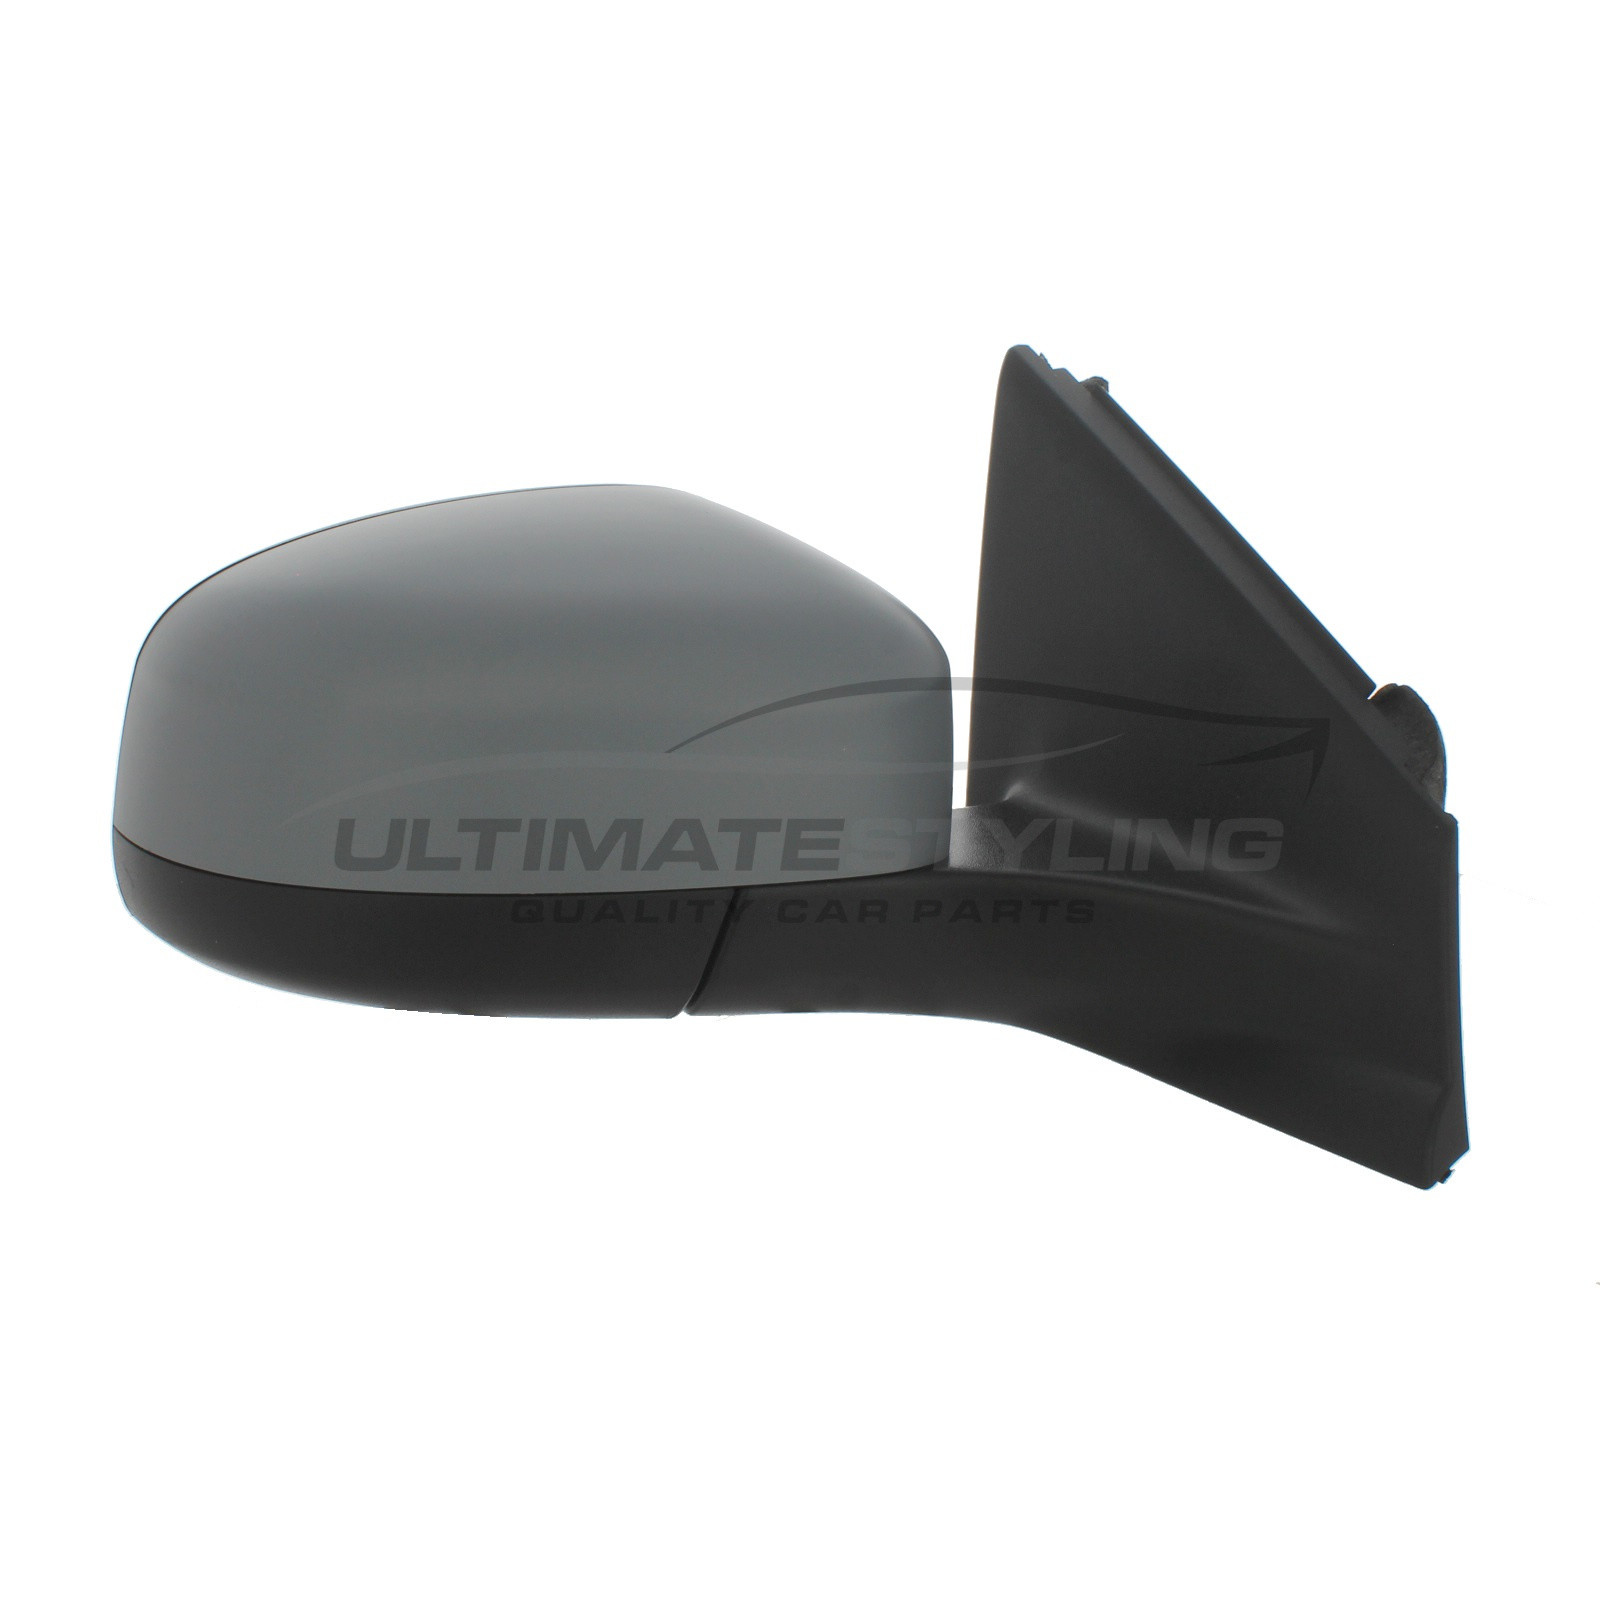 Ford Mondeo Wing Mirror / Door Mirror - Drivers Side (RH) - Electric adjustment - Heated Glass - Paintable - Black